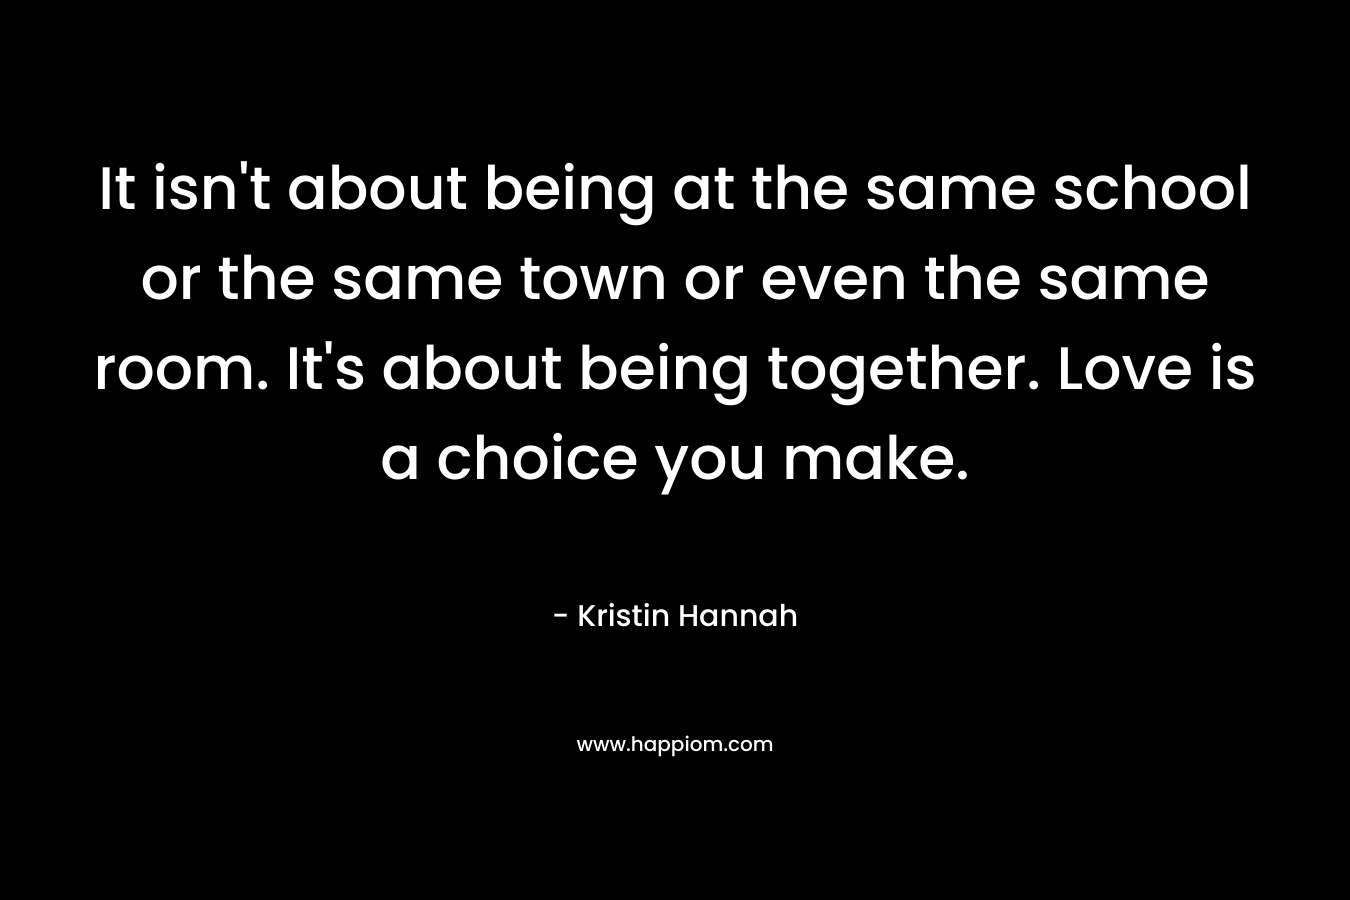 It isn't about being at the same school or the same town or even the same room. It's about being together. Love is a choice you make.